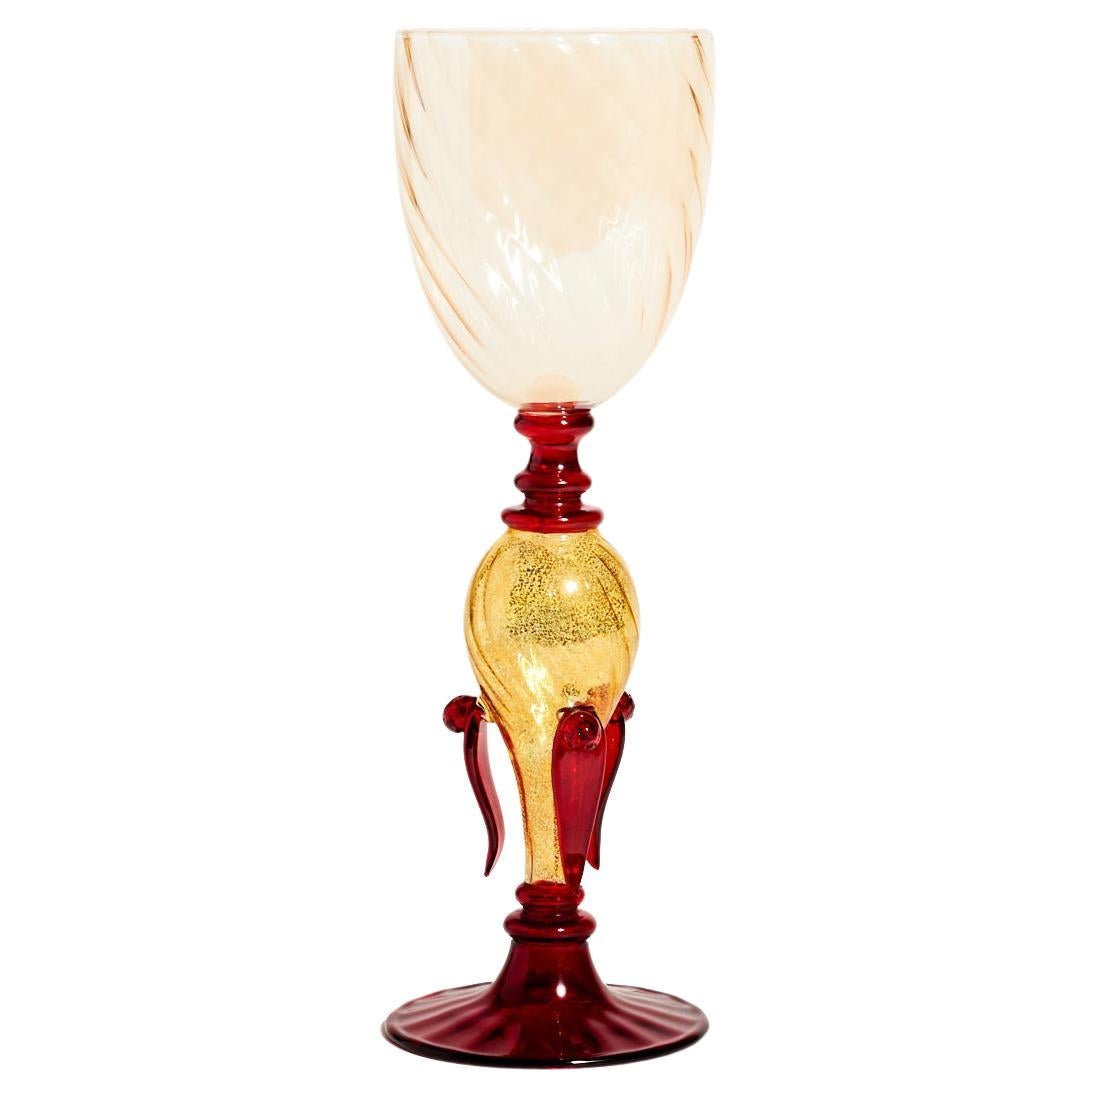 Venetian Blown Glass Goblet with Leaf and Berry Decoration